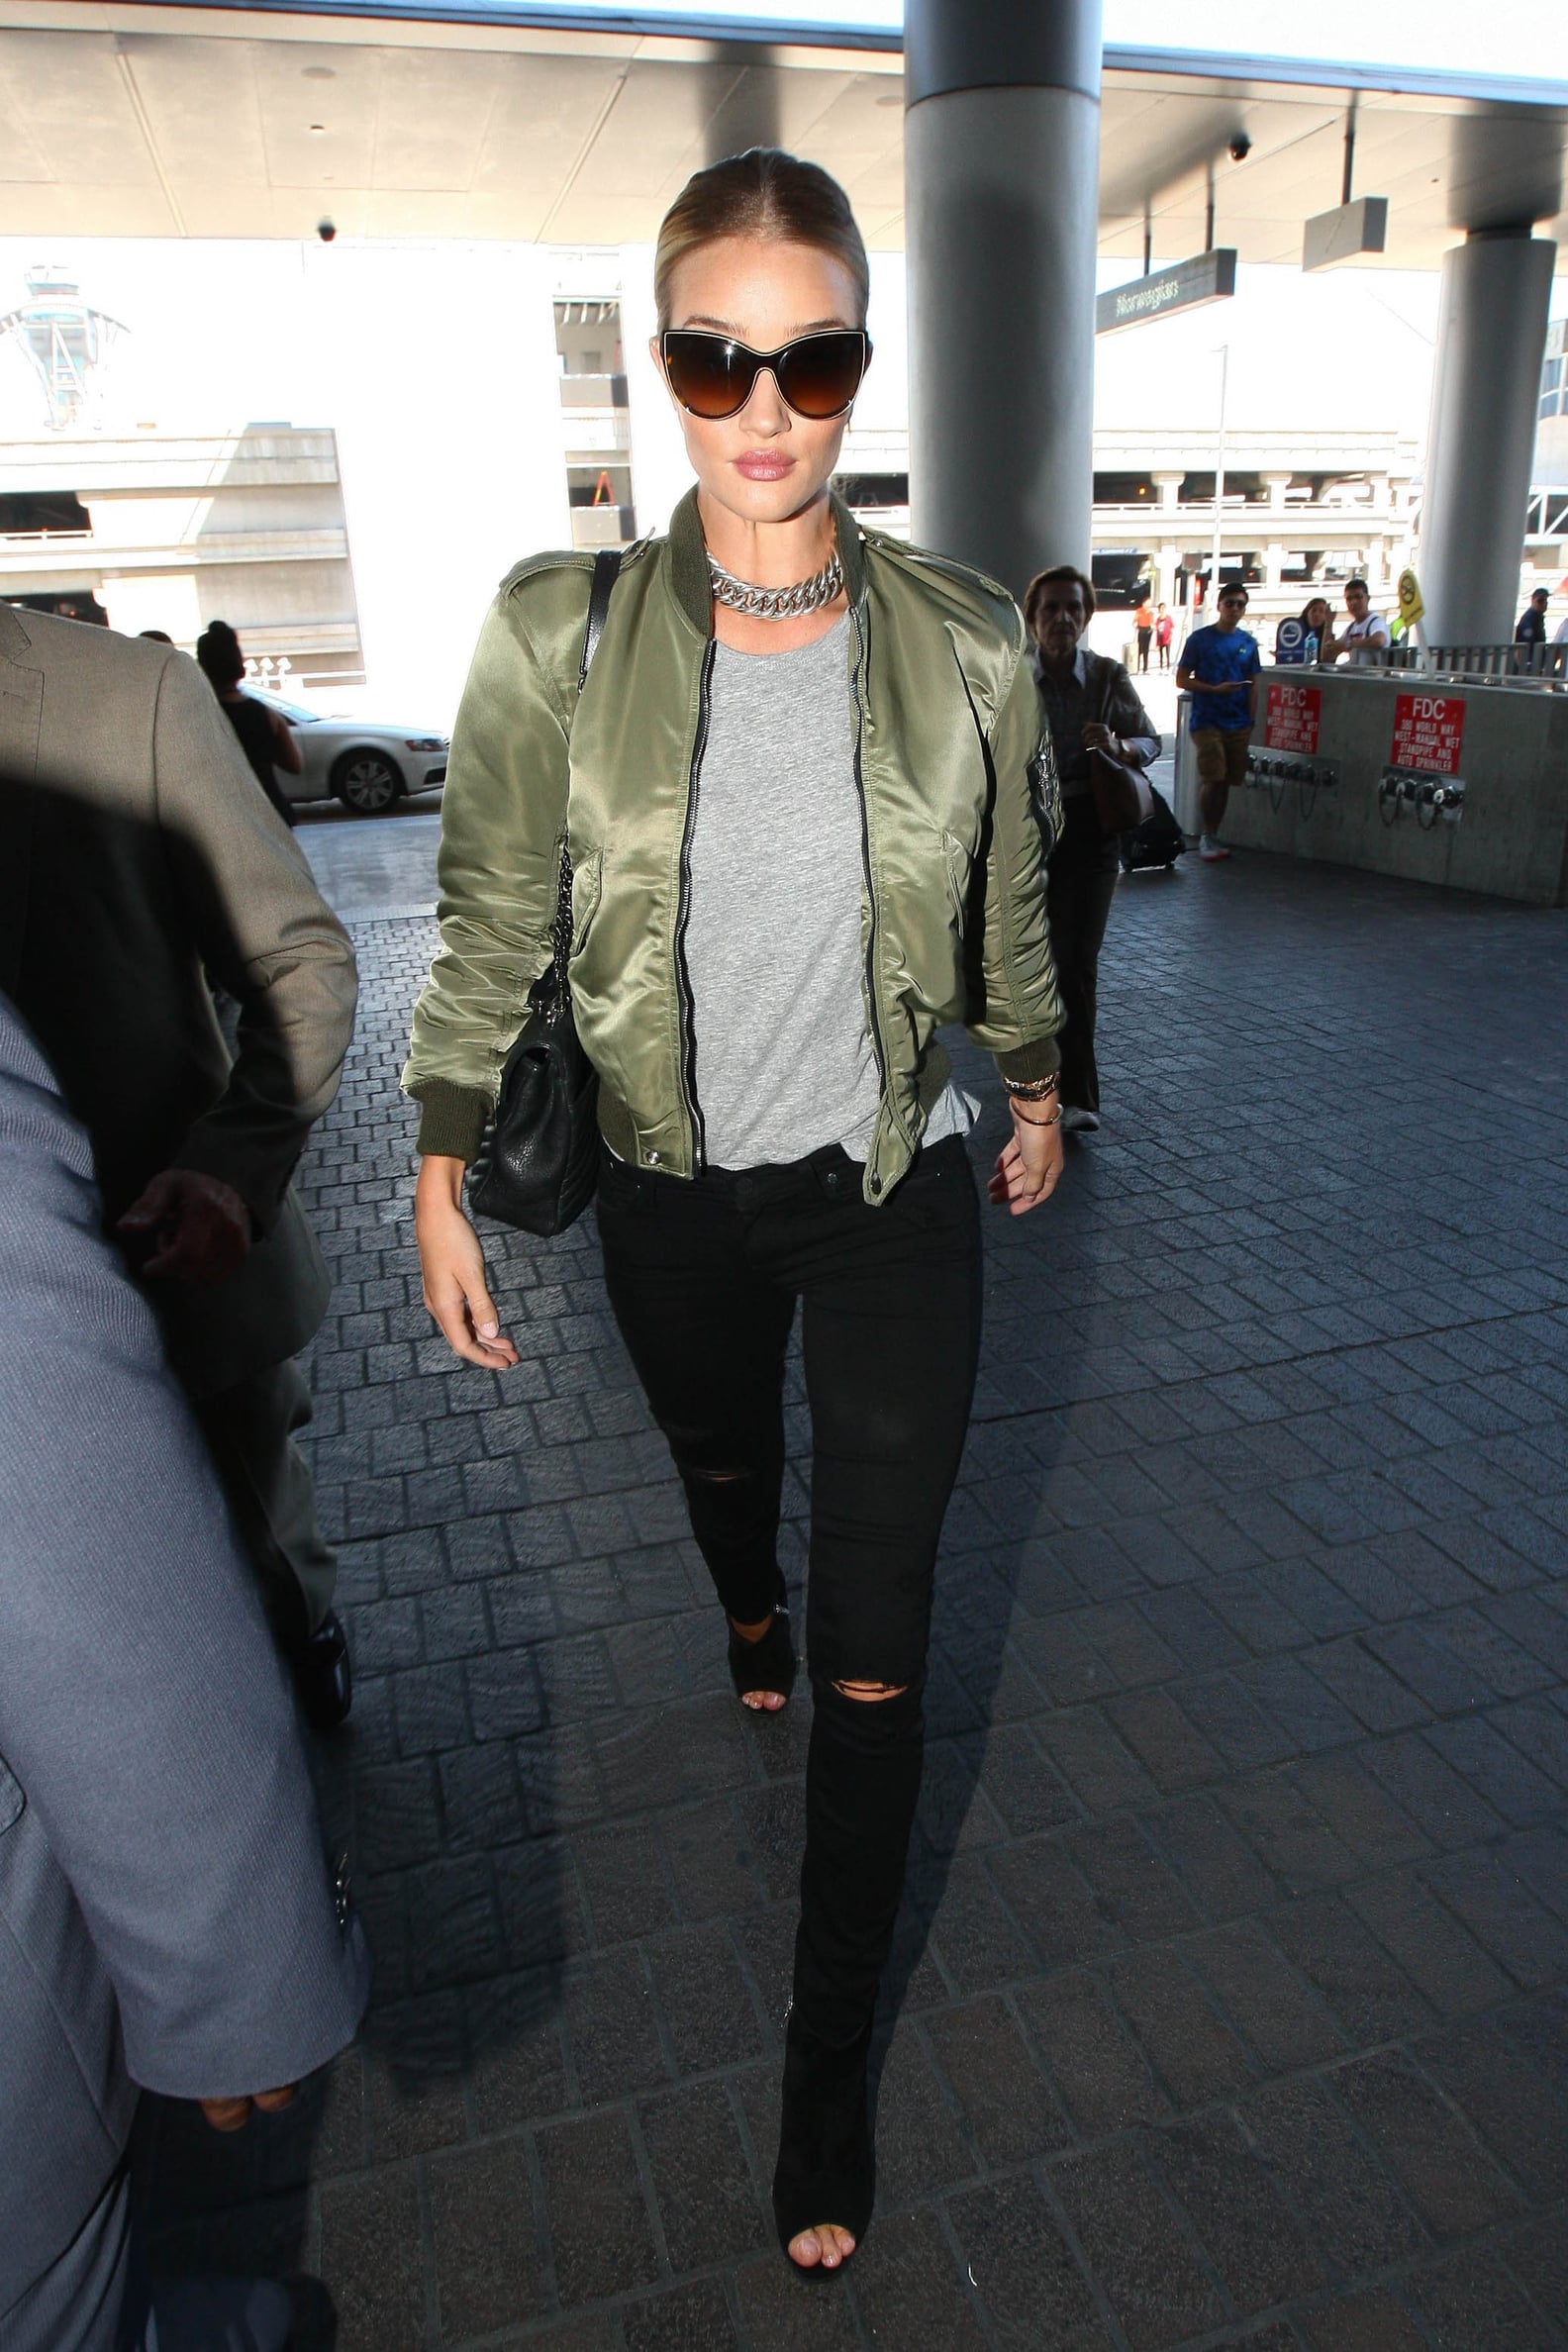 Models' Airport Outfits | POPSUGAR Fashion